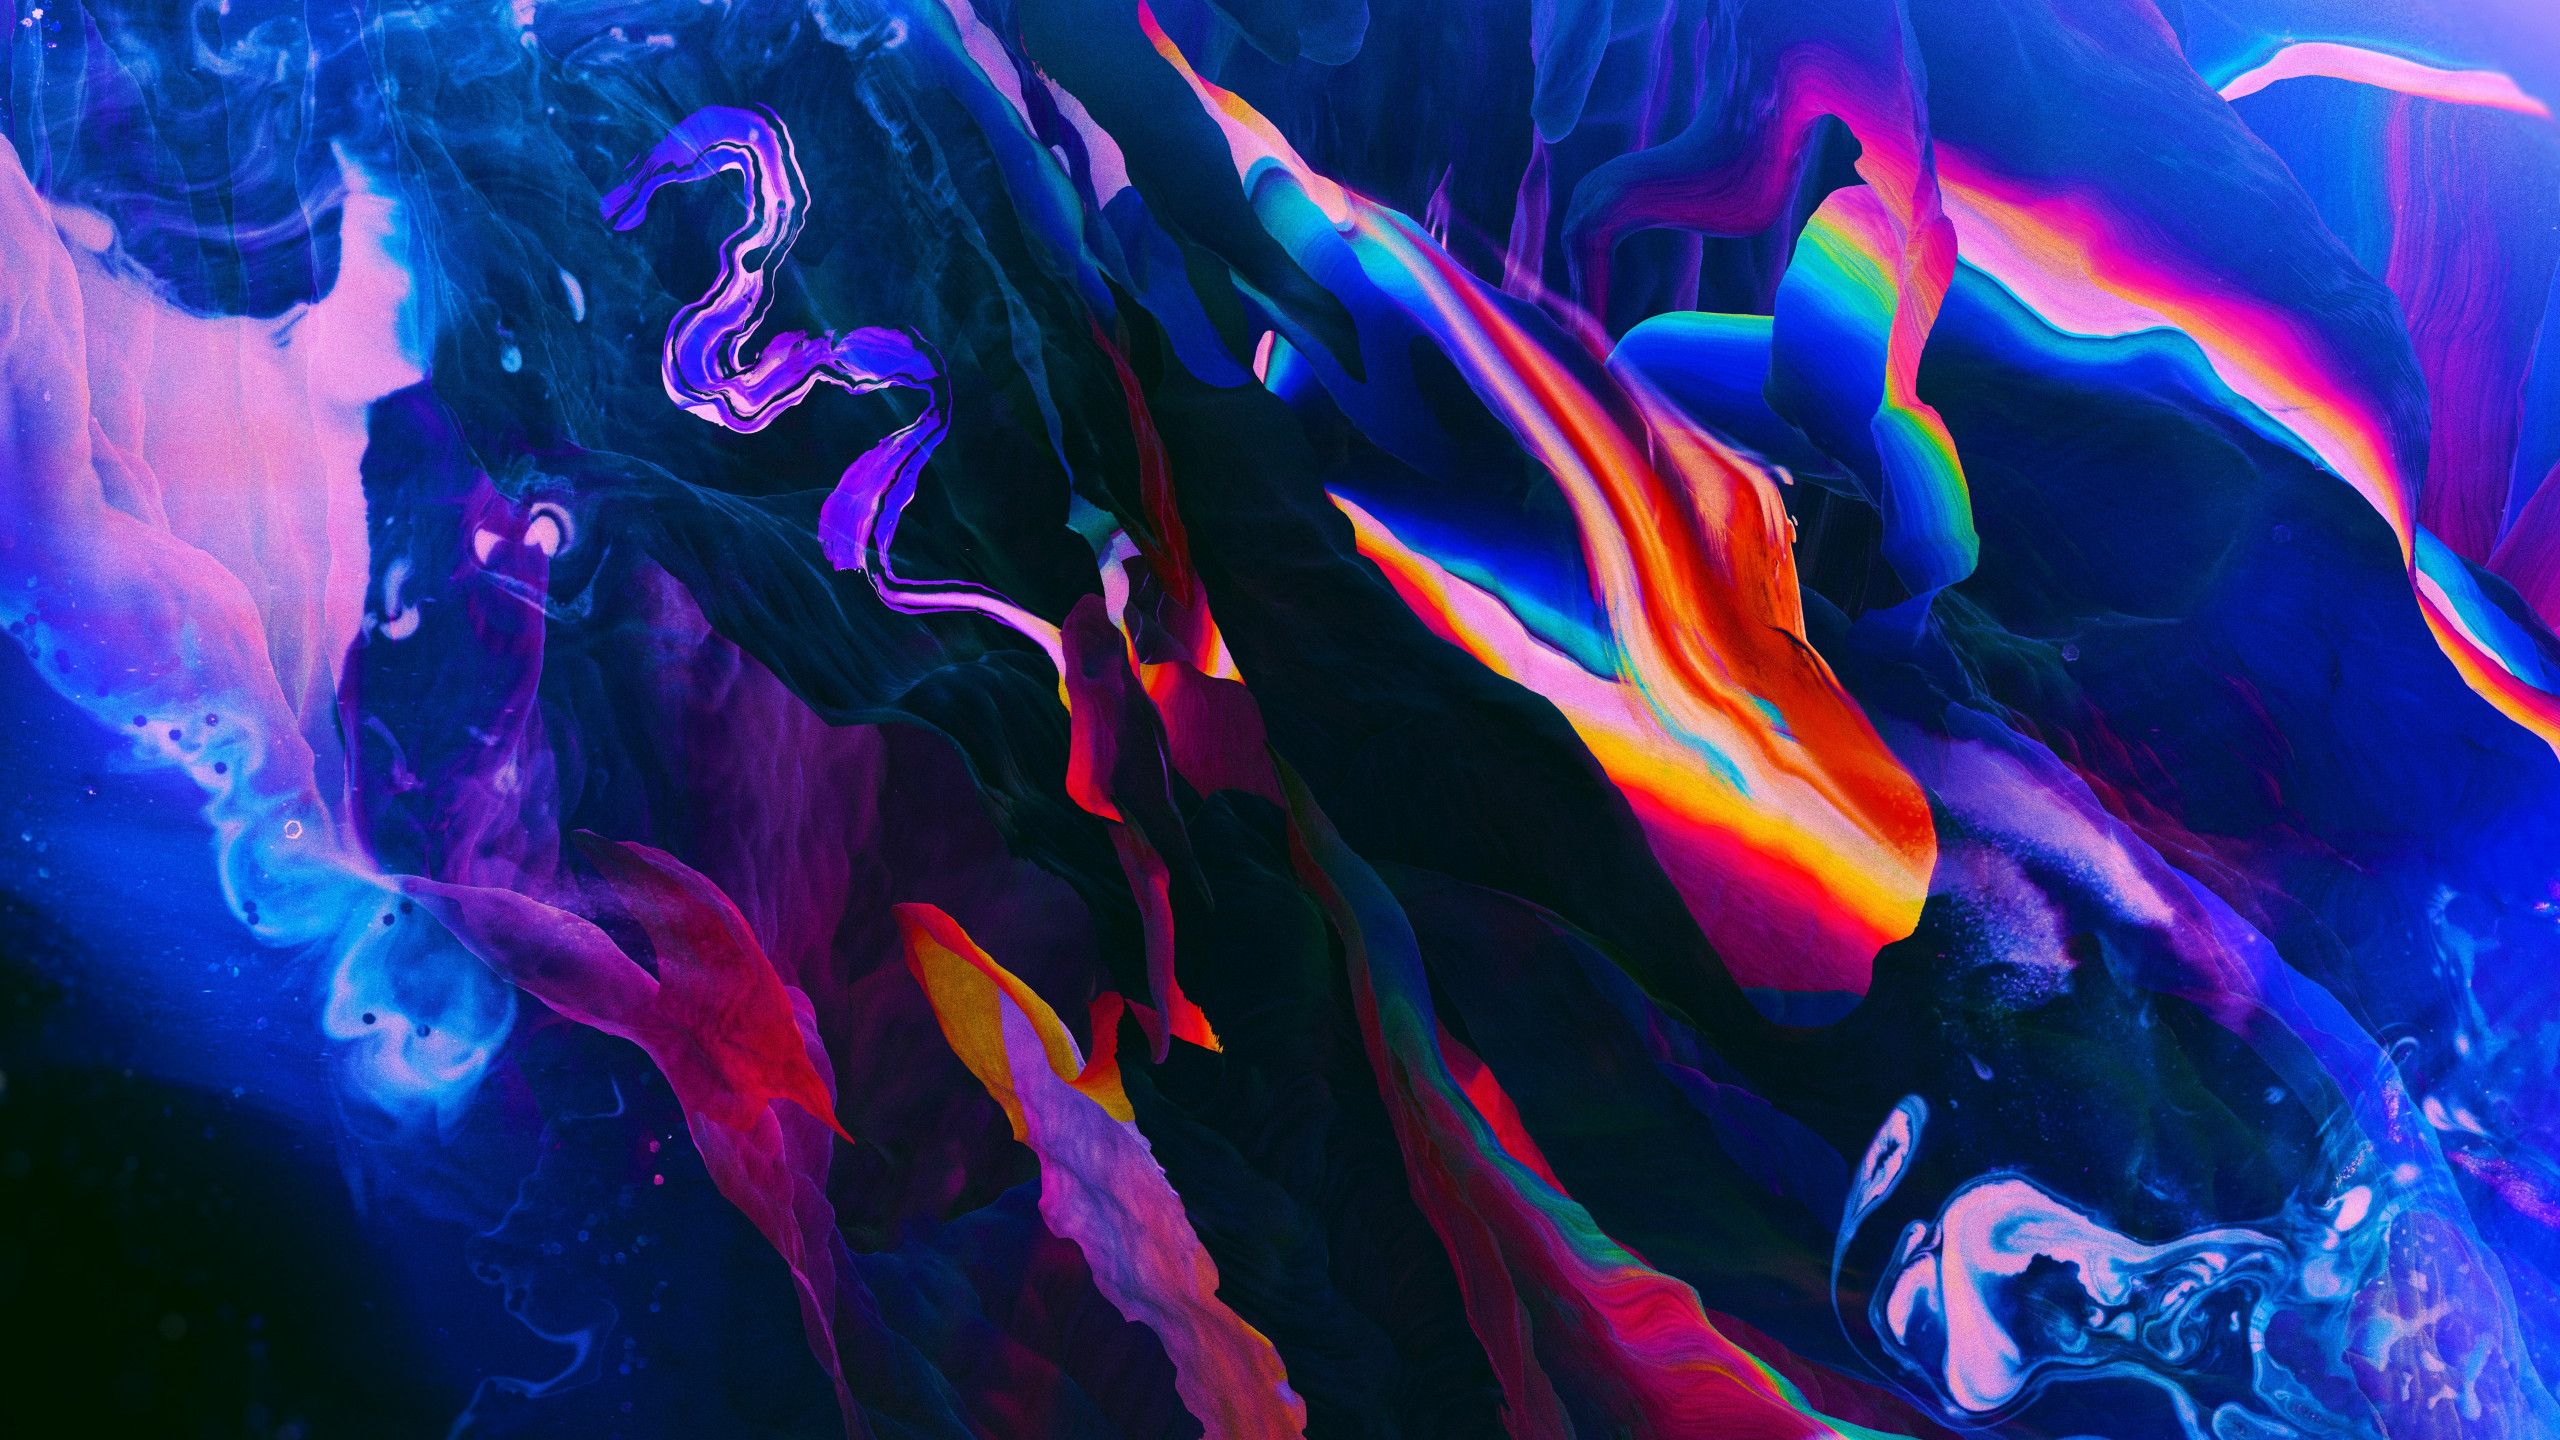 abstract-colorful-5k-wallpaper-2560x1440_577747-mm-90.jpg